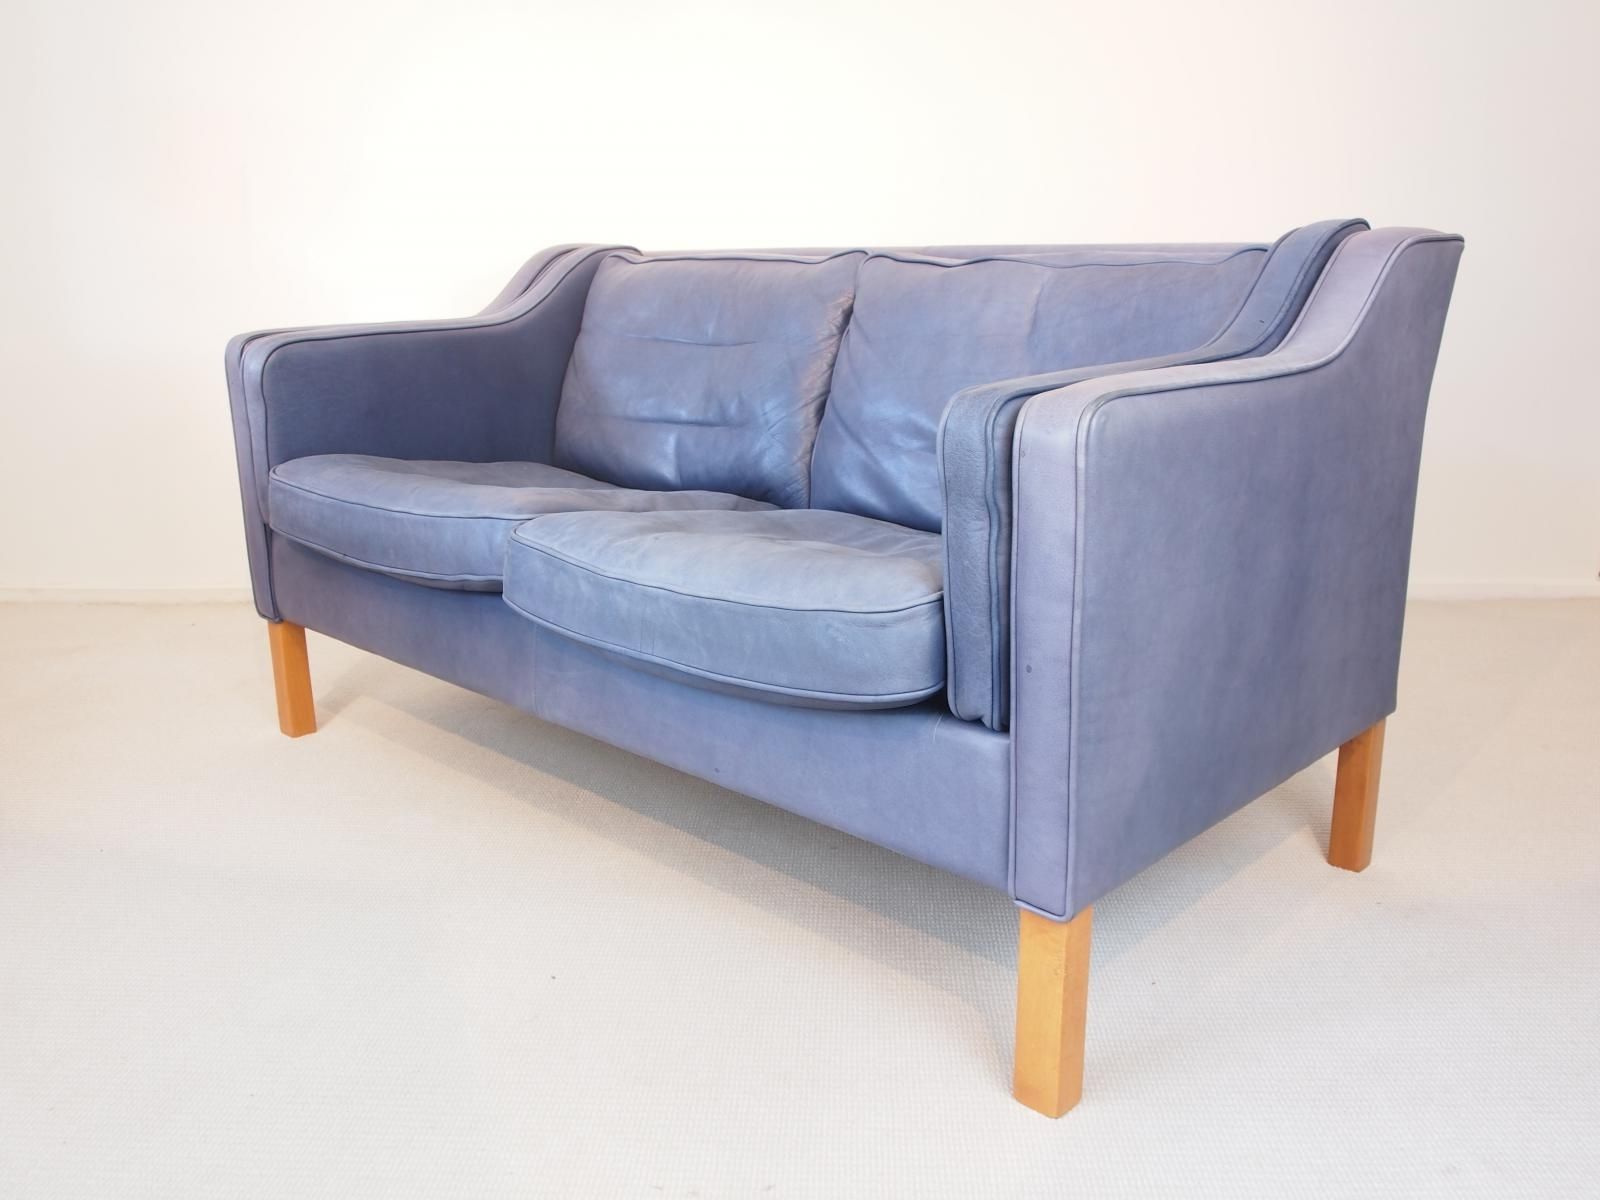 Most Recent Aniline Leather Sofas Regarding Vintage Blue Aniline Leather Sofa From Georg Thams For Sale At Pamono (View 19 of 20)